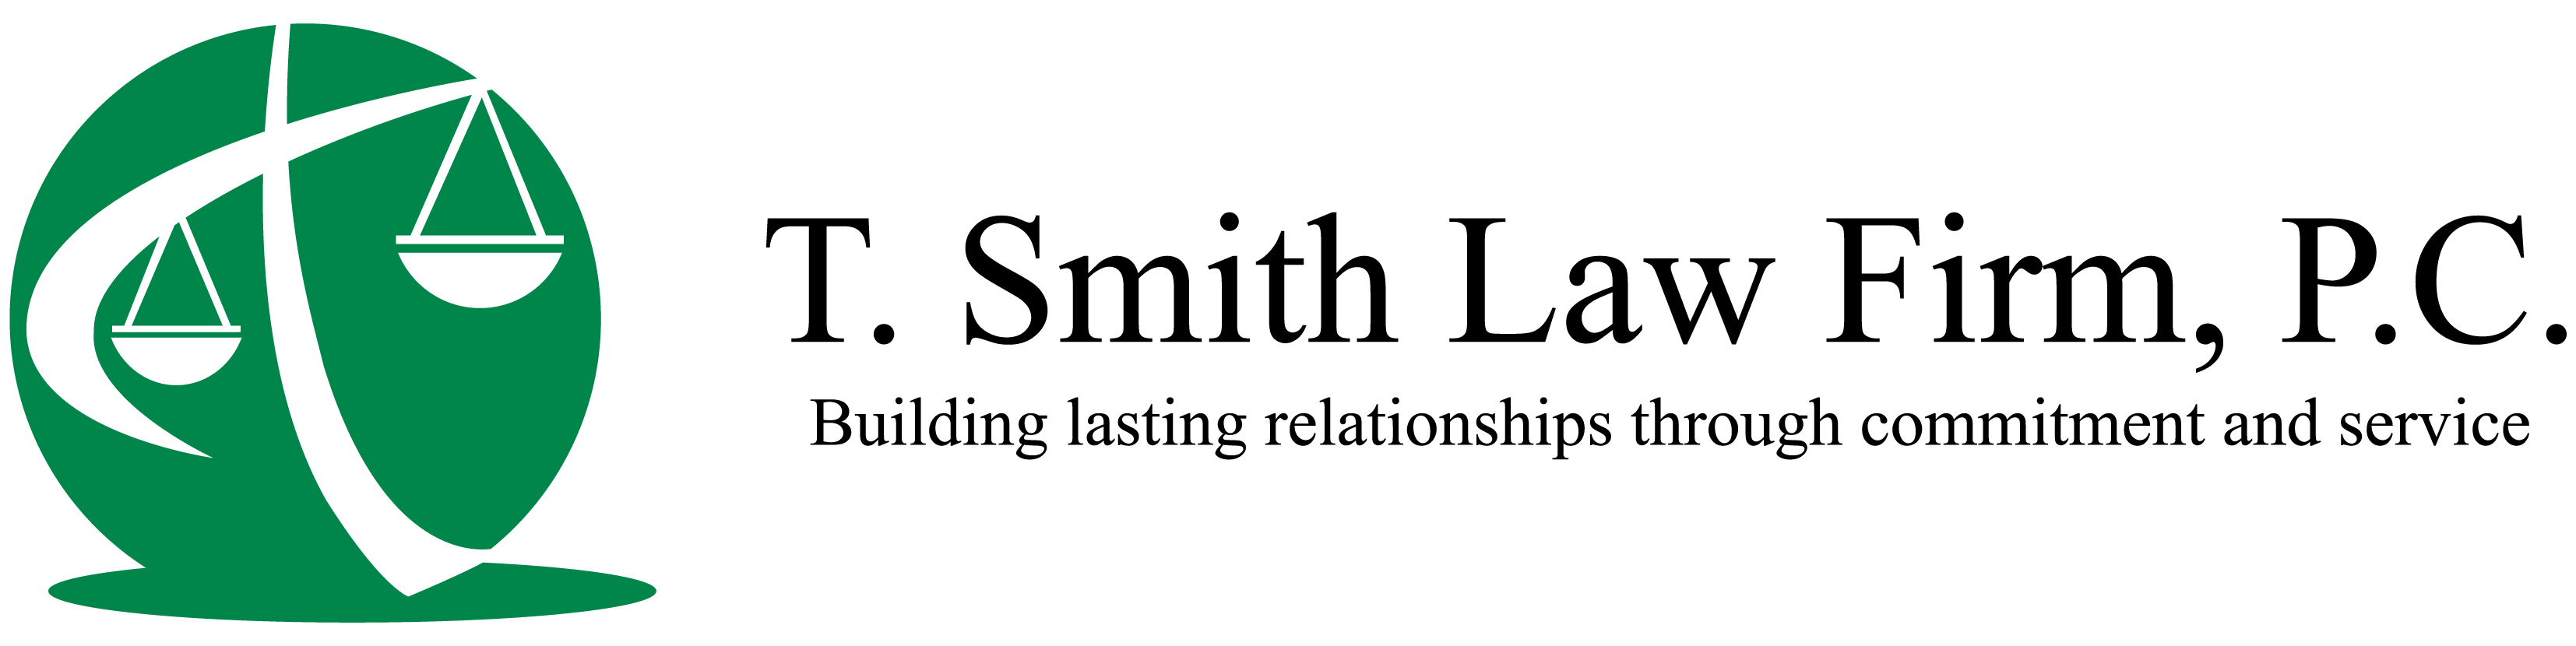 T. Smith Law Firm, P.C.